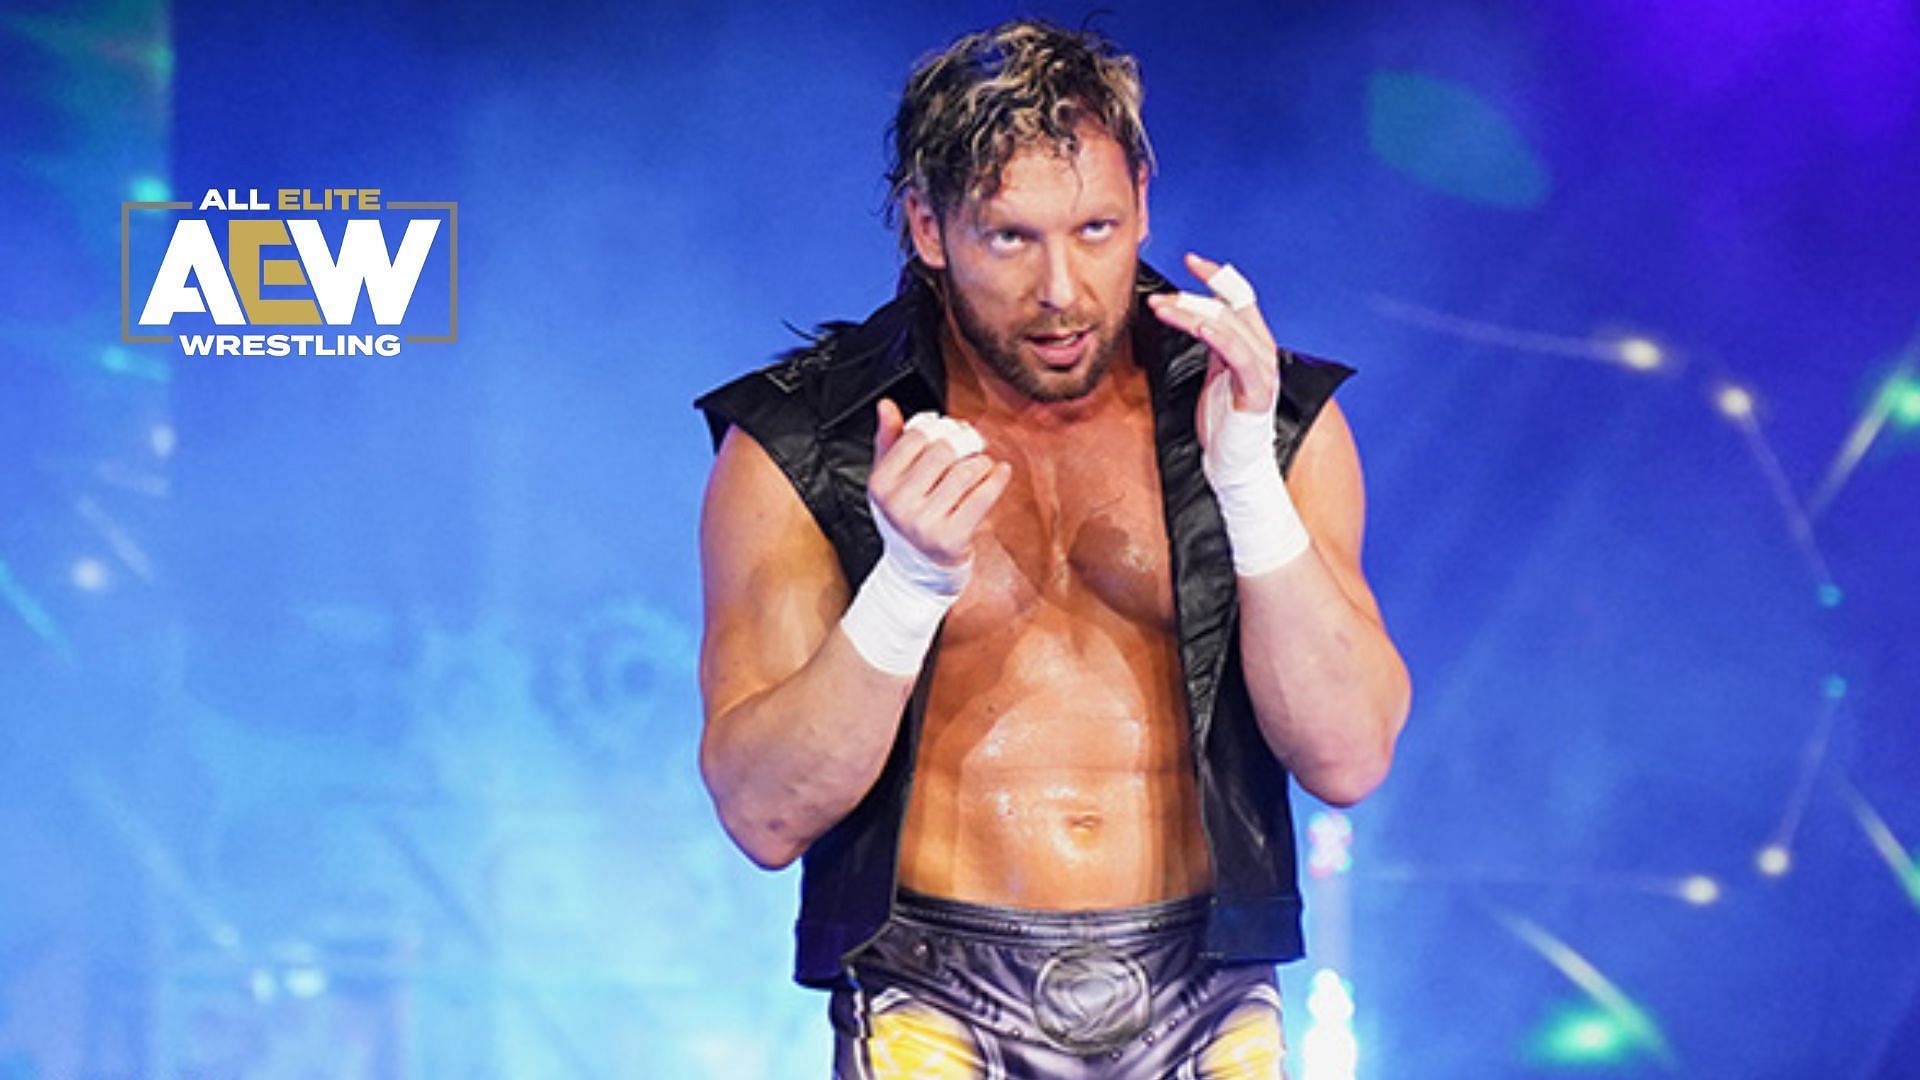 Kenny Omega made his returned at AEW Full Gear